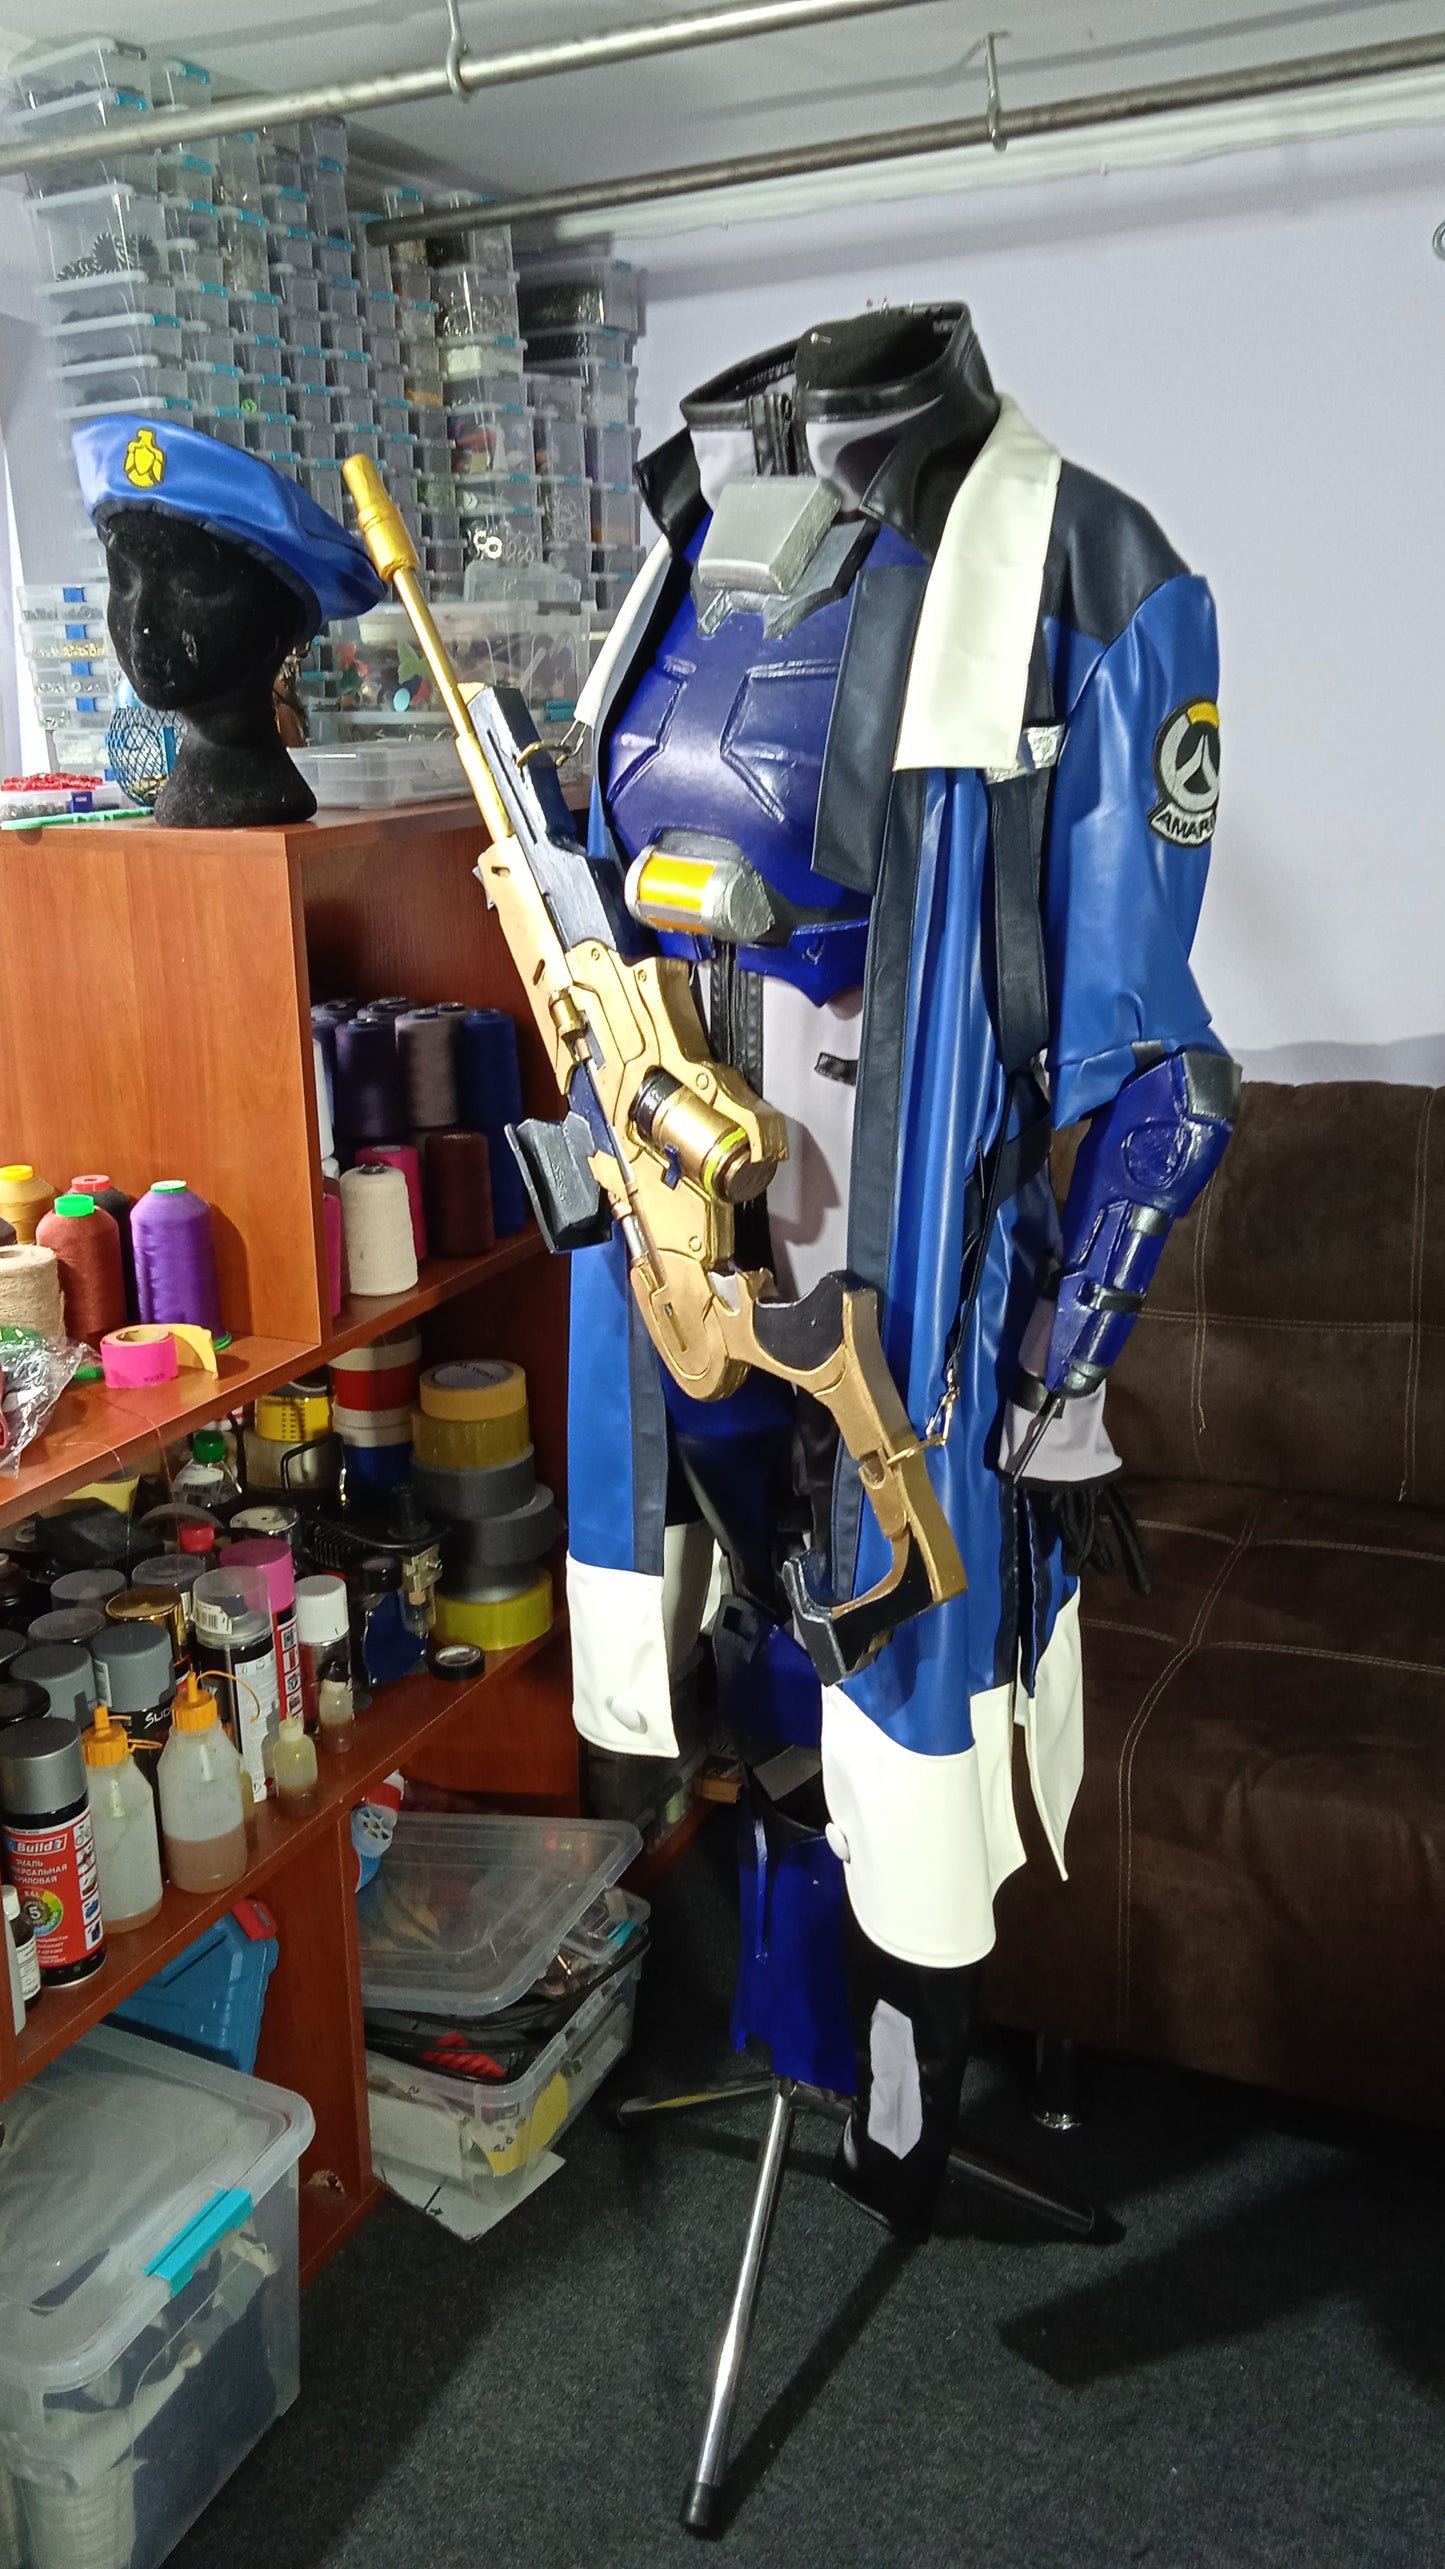 Overwatch Ana Horus cosplay outfit